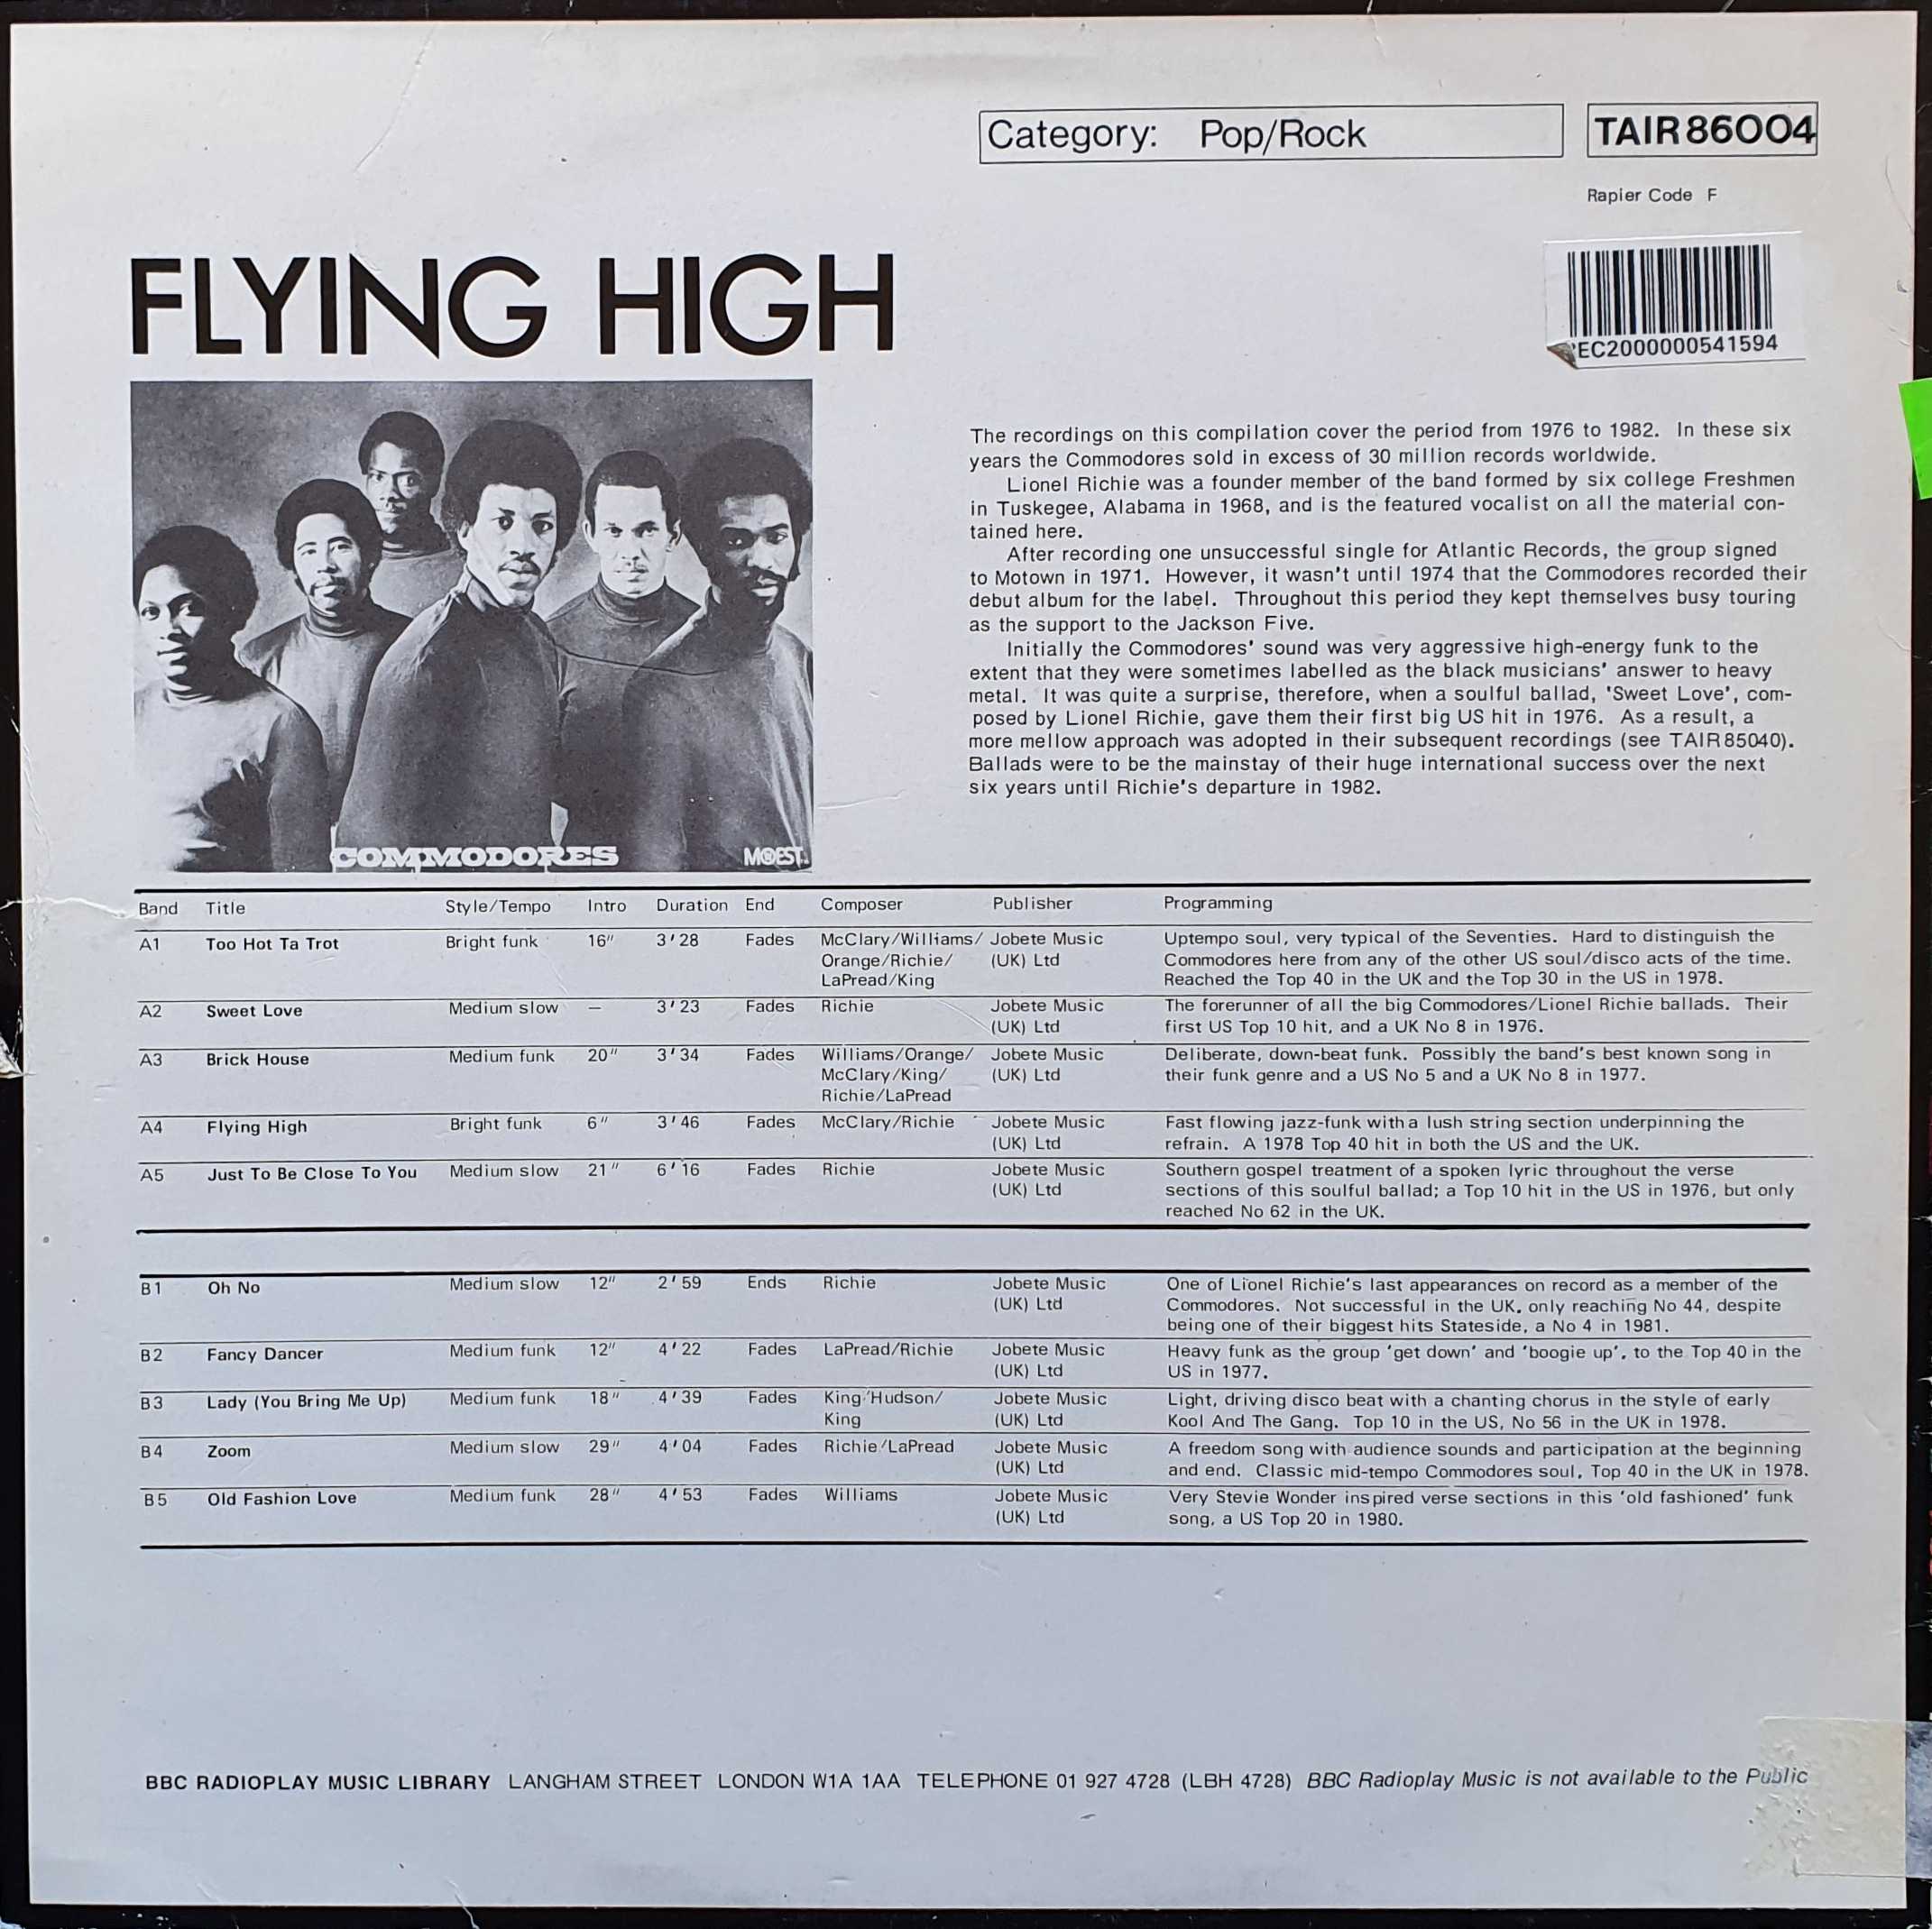 Picture of TAIR 86004 Flying high by artist Commodores from the BBC records and Tapes library